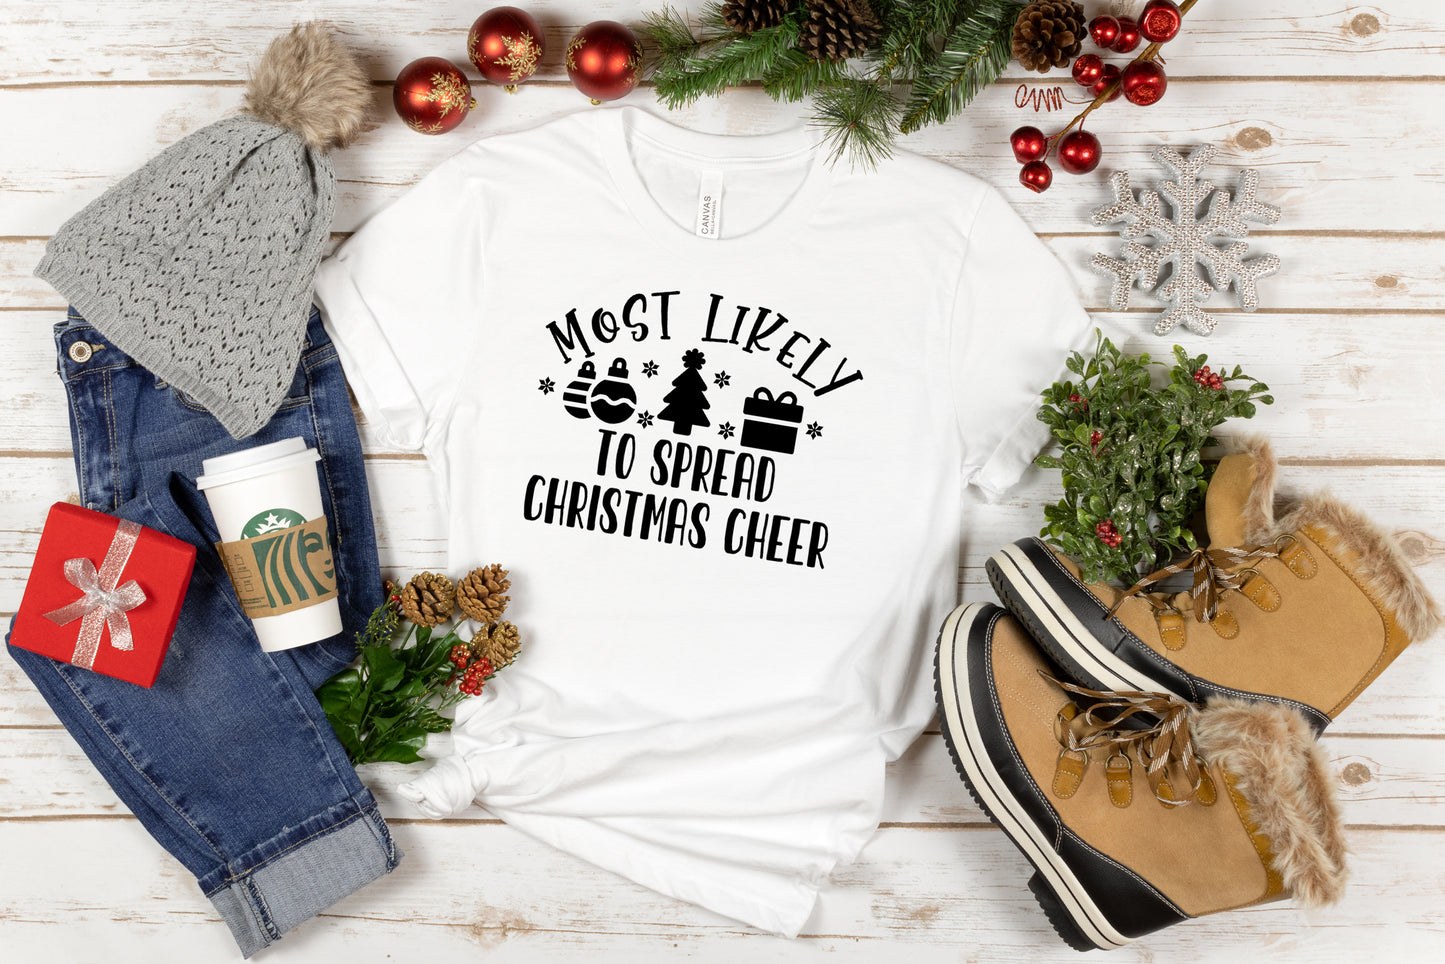 Personalized Christmas Gift T-shirt - "Most Likely to" T-shirts